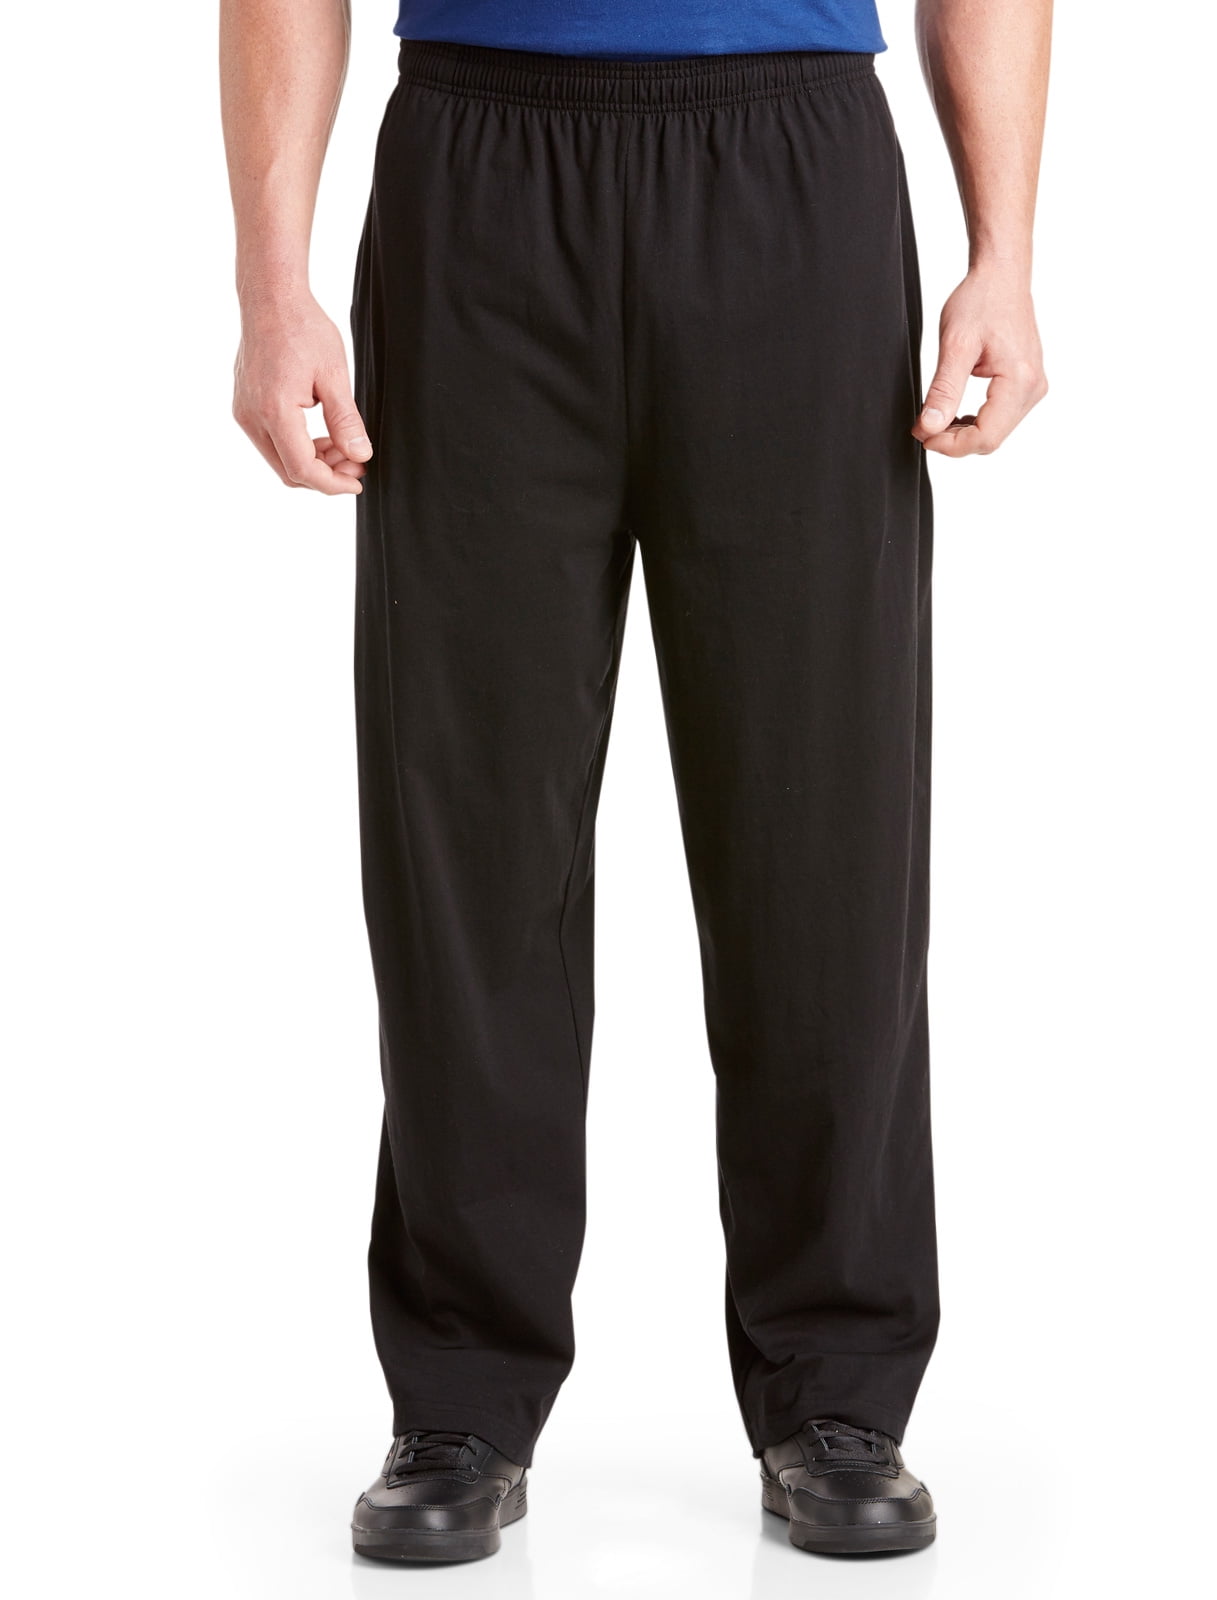 Harbor Bay by DXL Big and Tall Men's Open-Hemmed Jersey Pants, Black ...